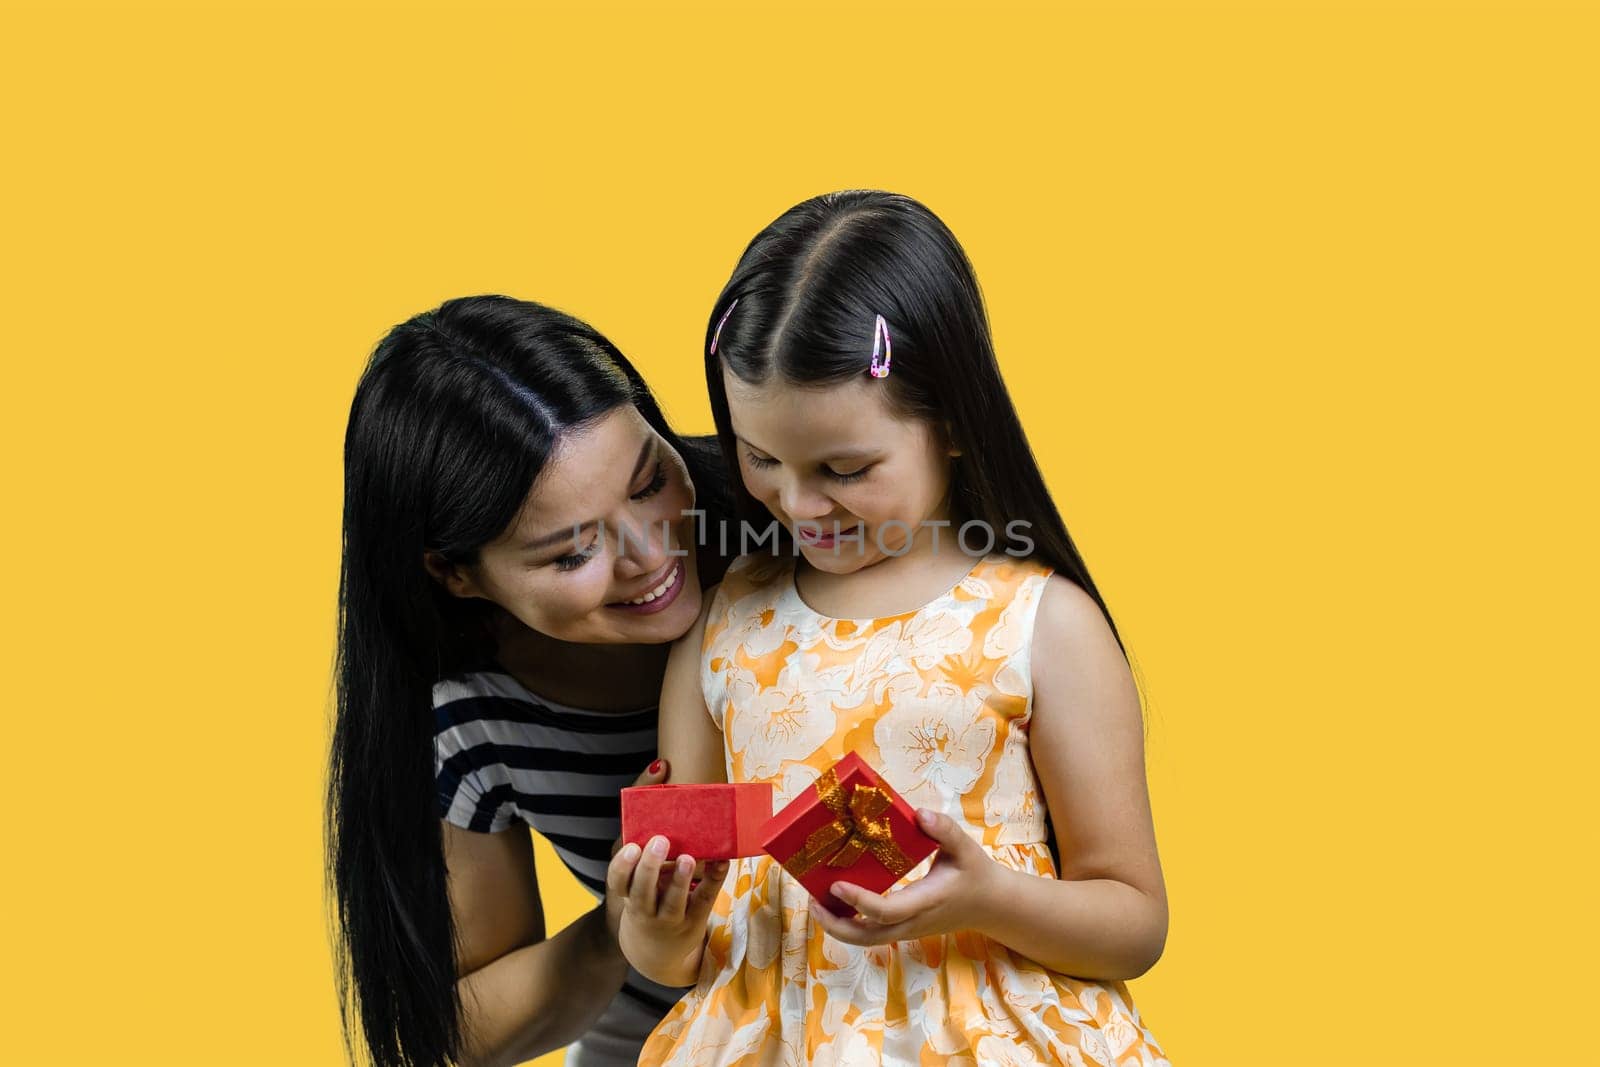 Little girl is opening a red gift box together with her mom. Isolated on yellow background.